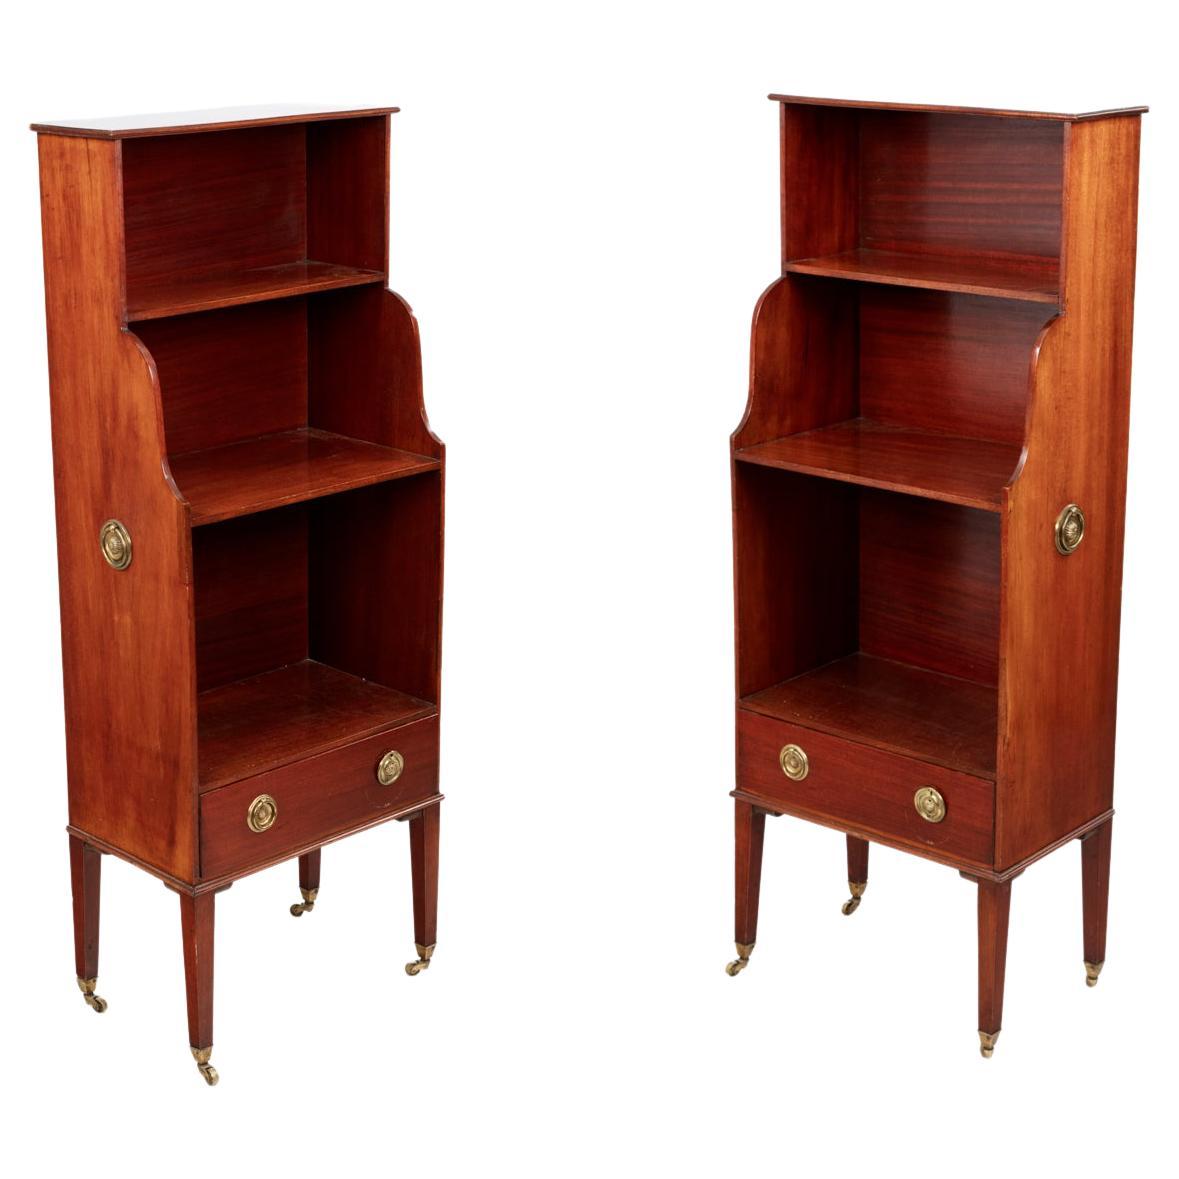 Pair of Miniature Waterfall Bookcases For Sale